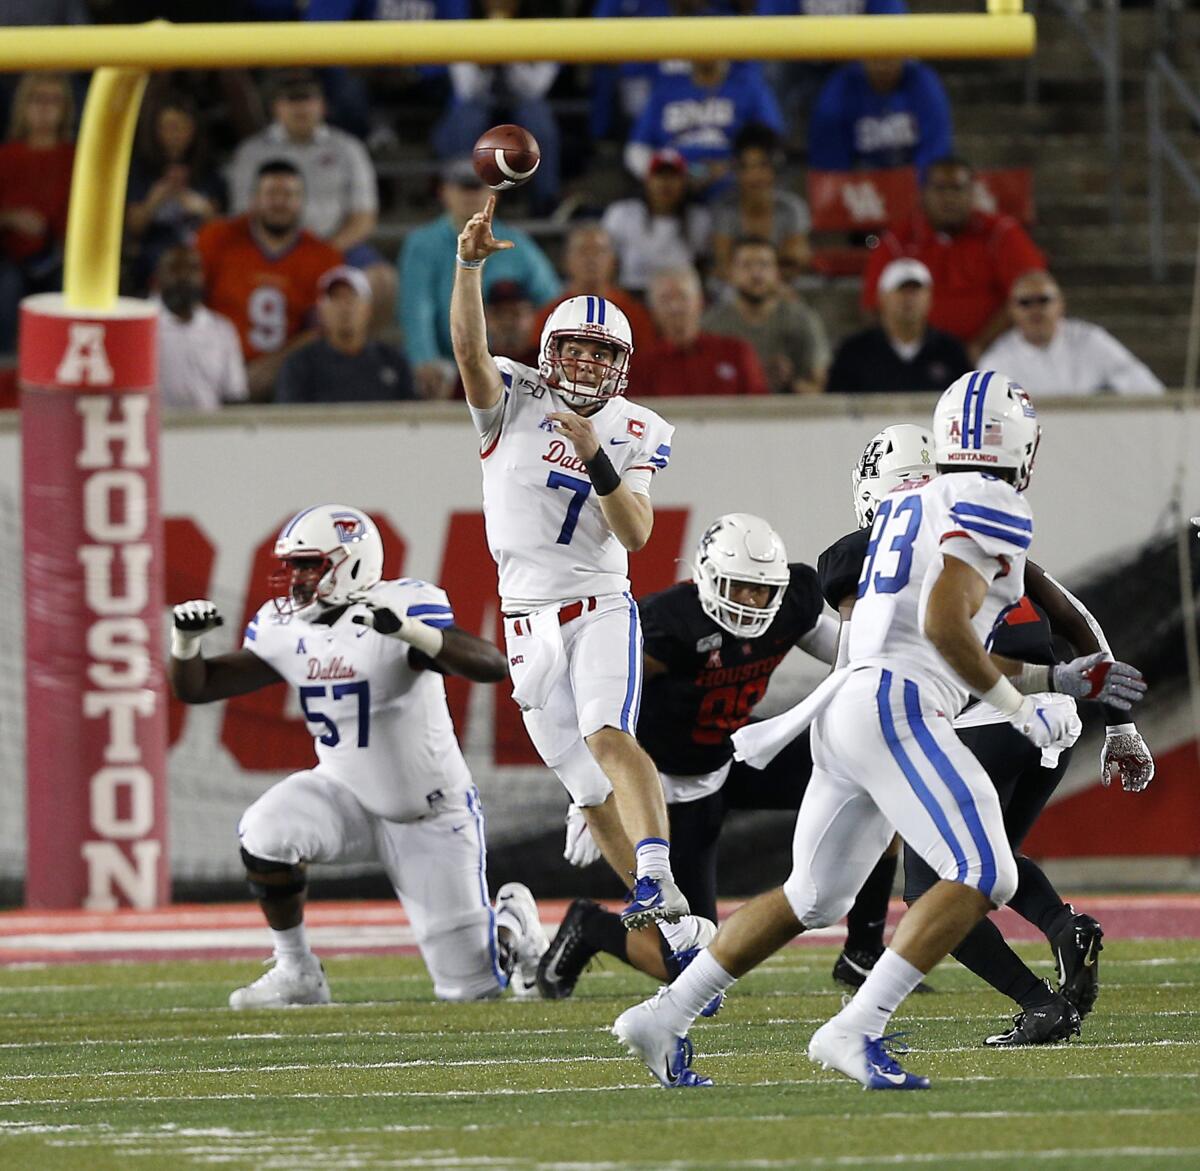 SMU's Shane Buechele (7) throws a pass across the middle to Kylen Granson (83) during the first half against Houston on Thursday in Houston.